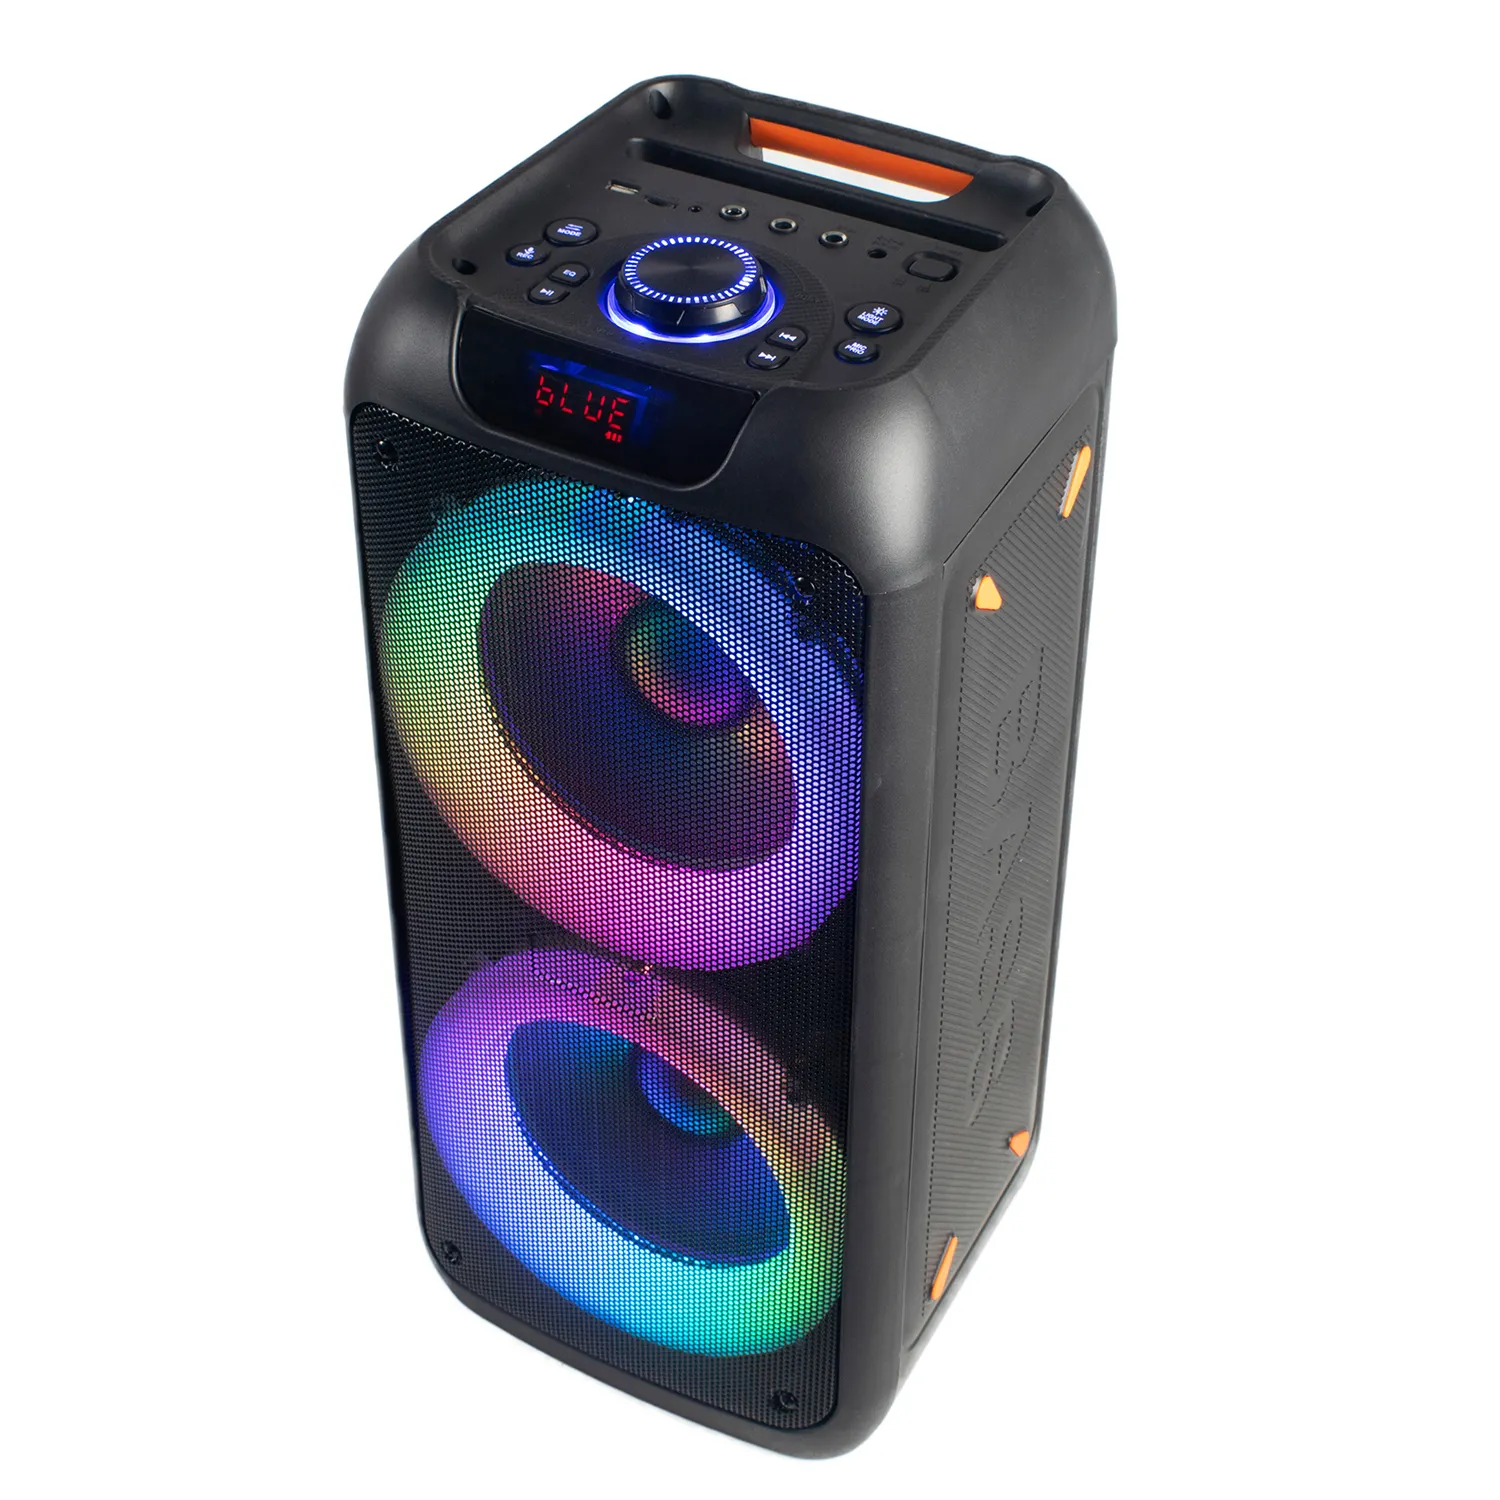 New Design outdoor speaker blue tooth speaker video 14 inch trolley blue tooth speaker with lcd screen